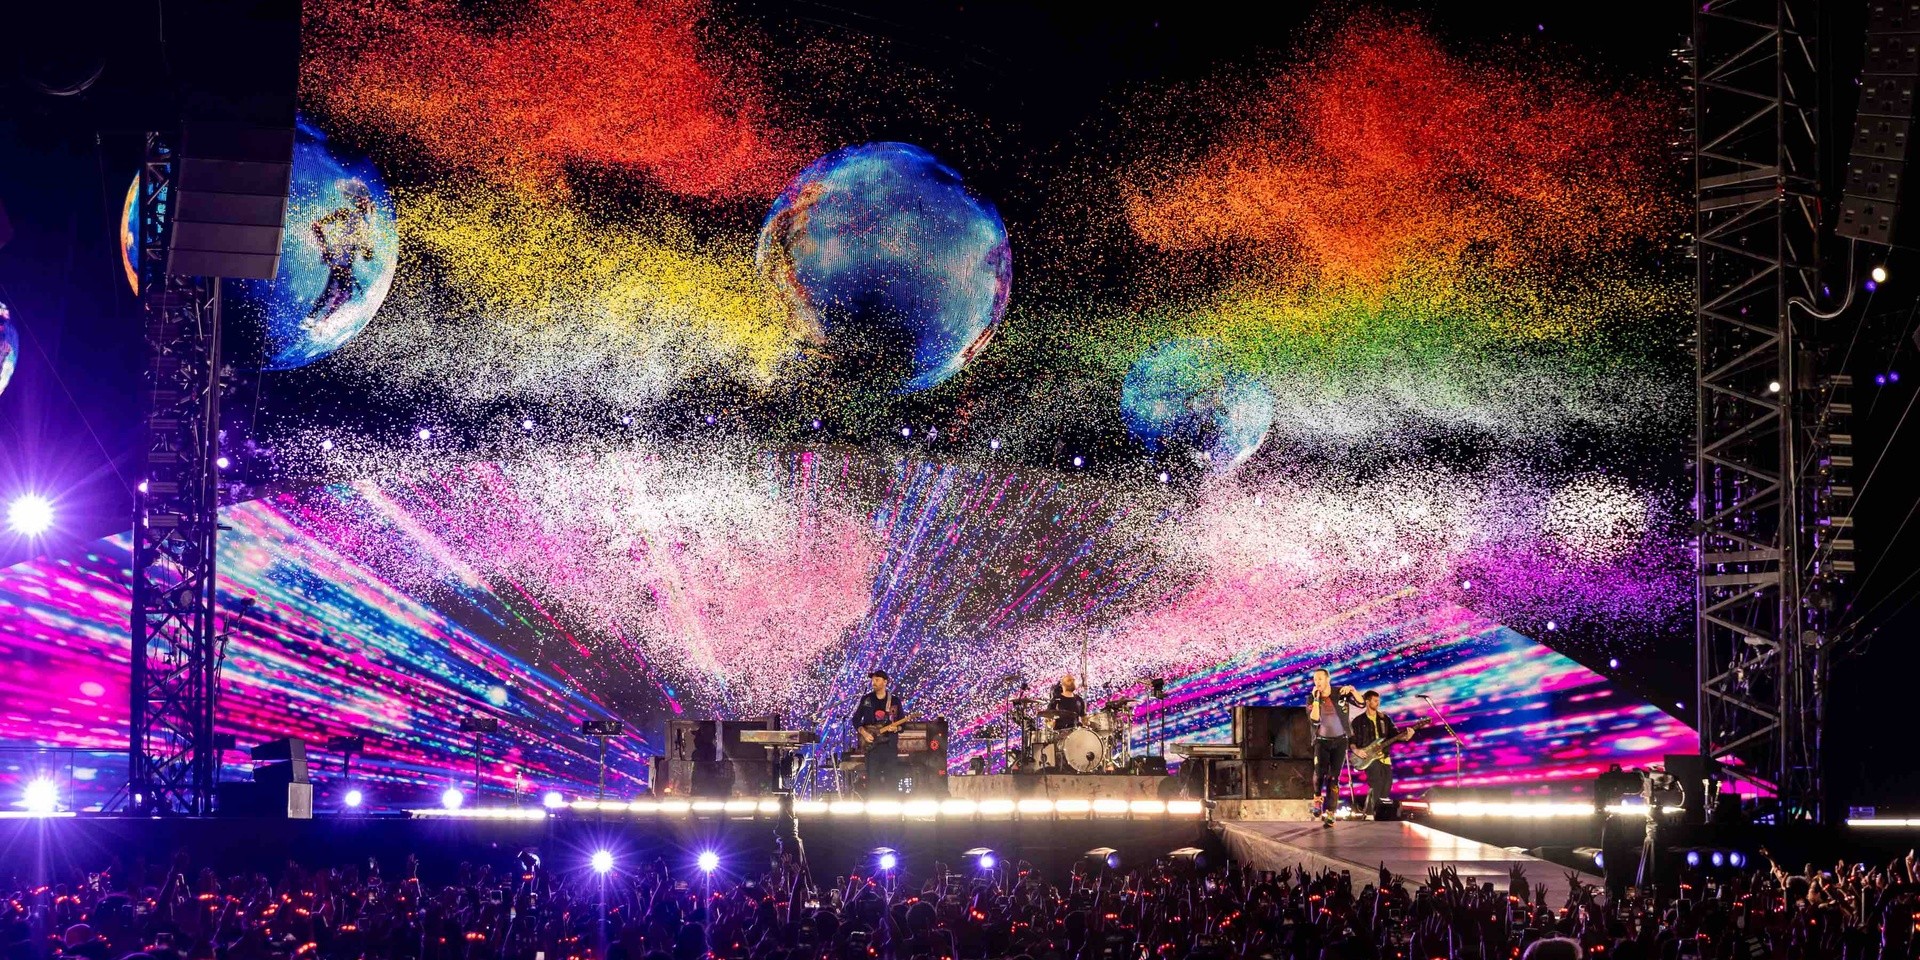 Coldplay bring fans into a breathtaking universe in ‘Music of the Spheres World Tour’ concert in Singapore – gig report